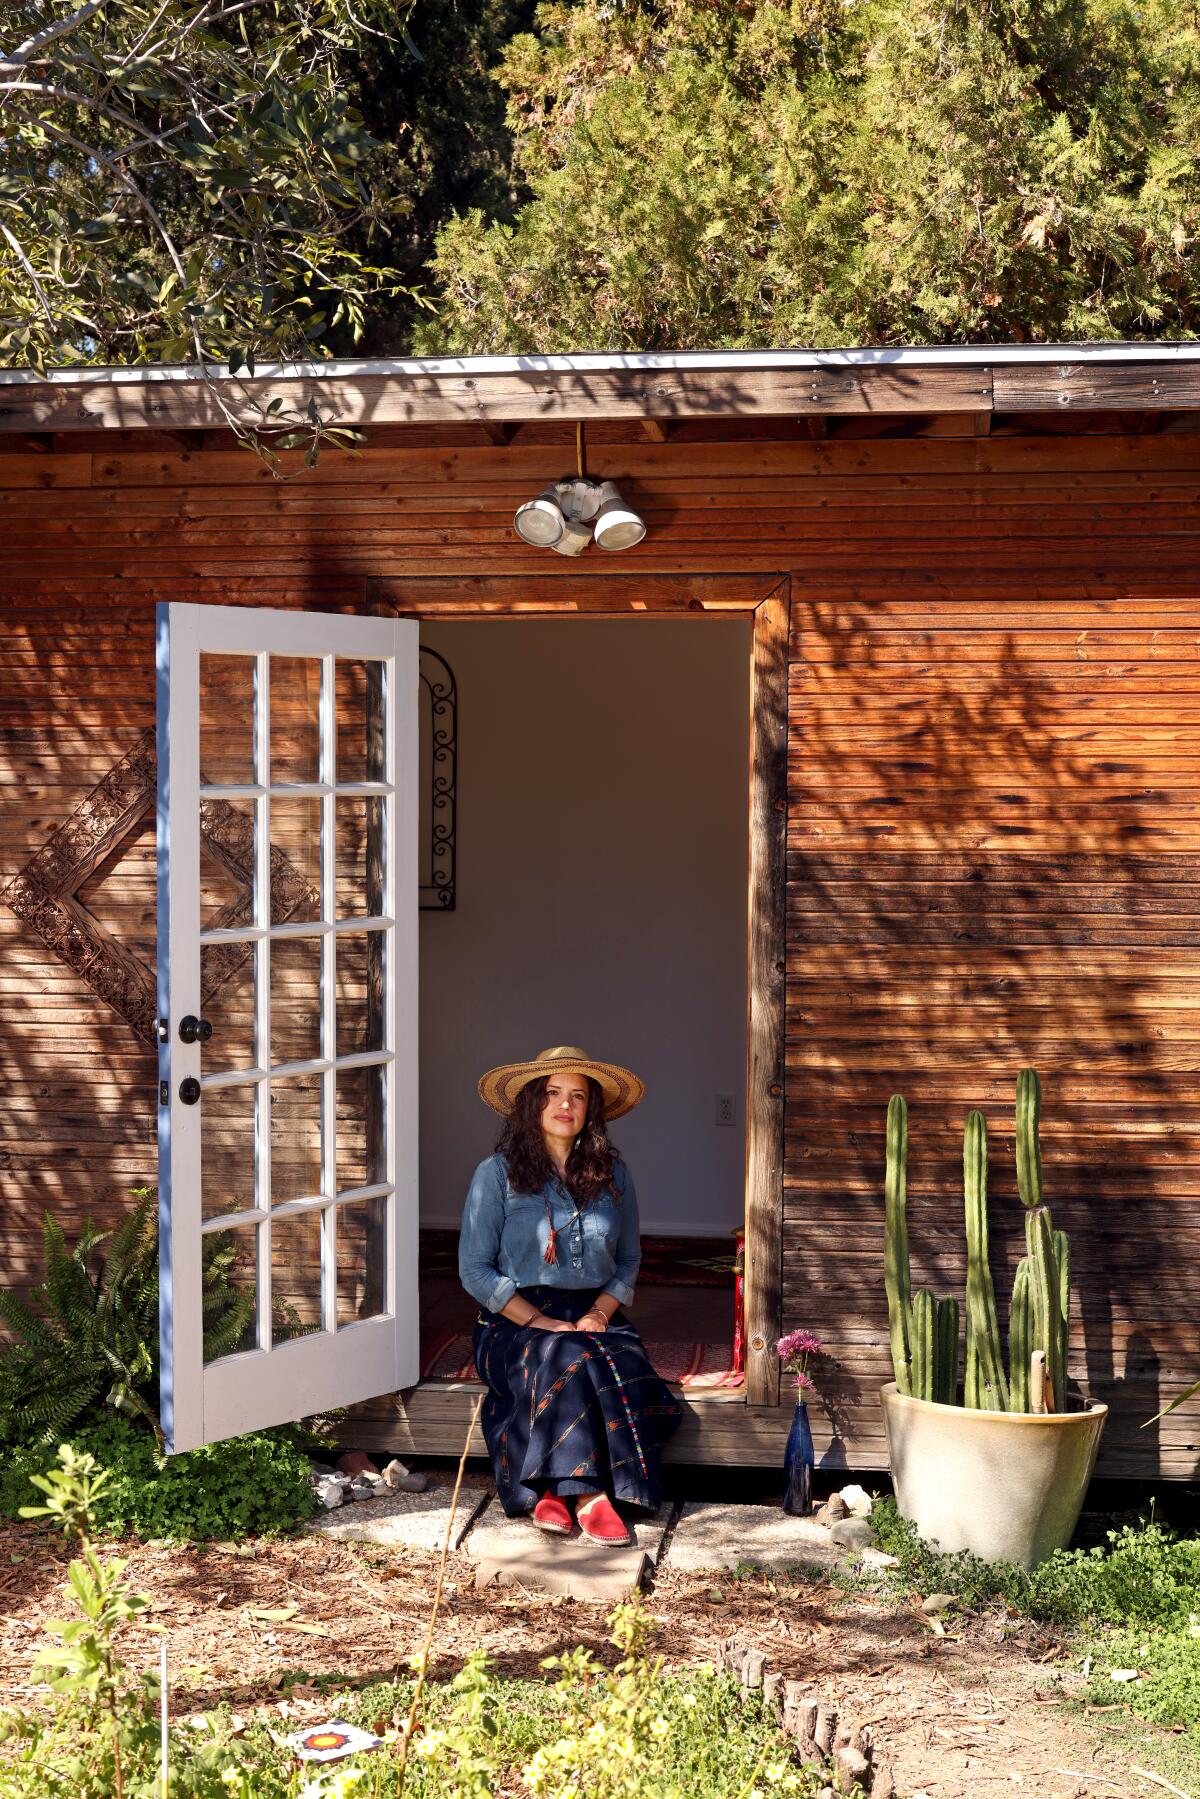 A woman wearing a hat smiles while sitting in the doorway of a wood structure.